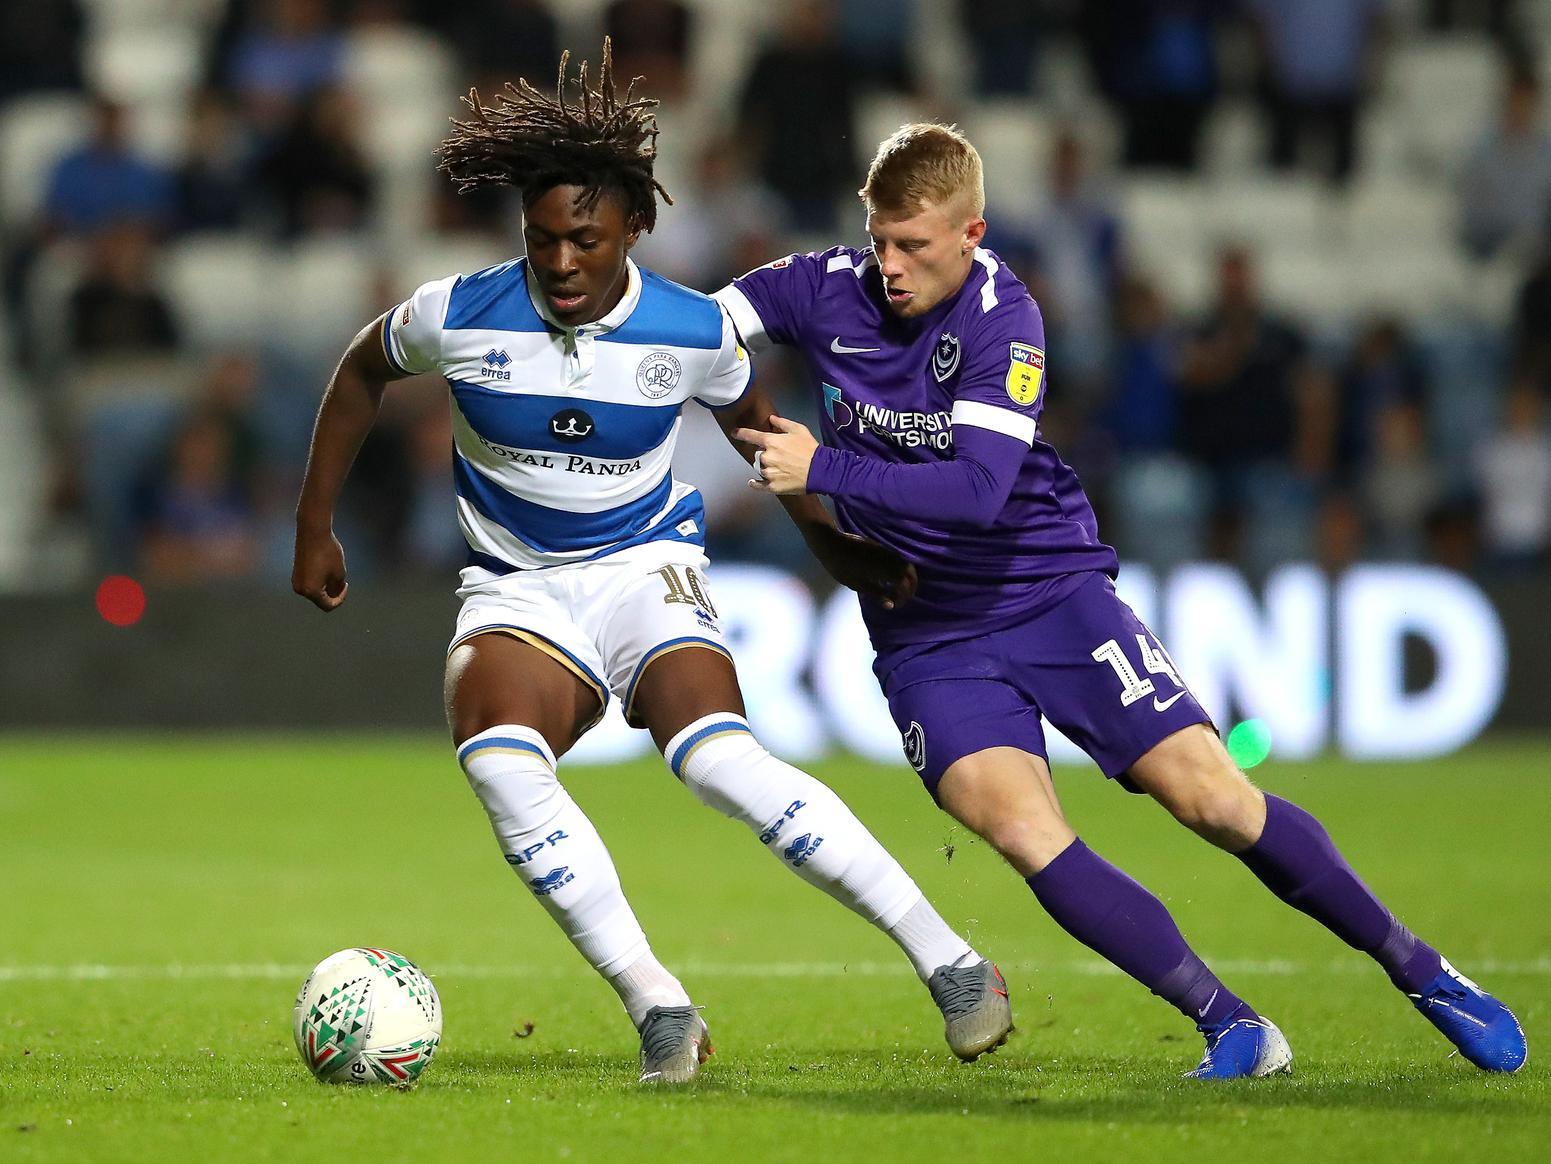 QPR's England under-20s international has the highest average rating so far at 7.5 and is selected on the left wing. Photo by Alex Pantling/Getty Images.